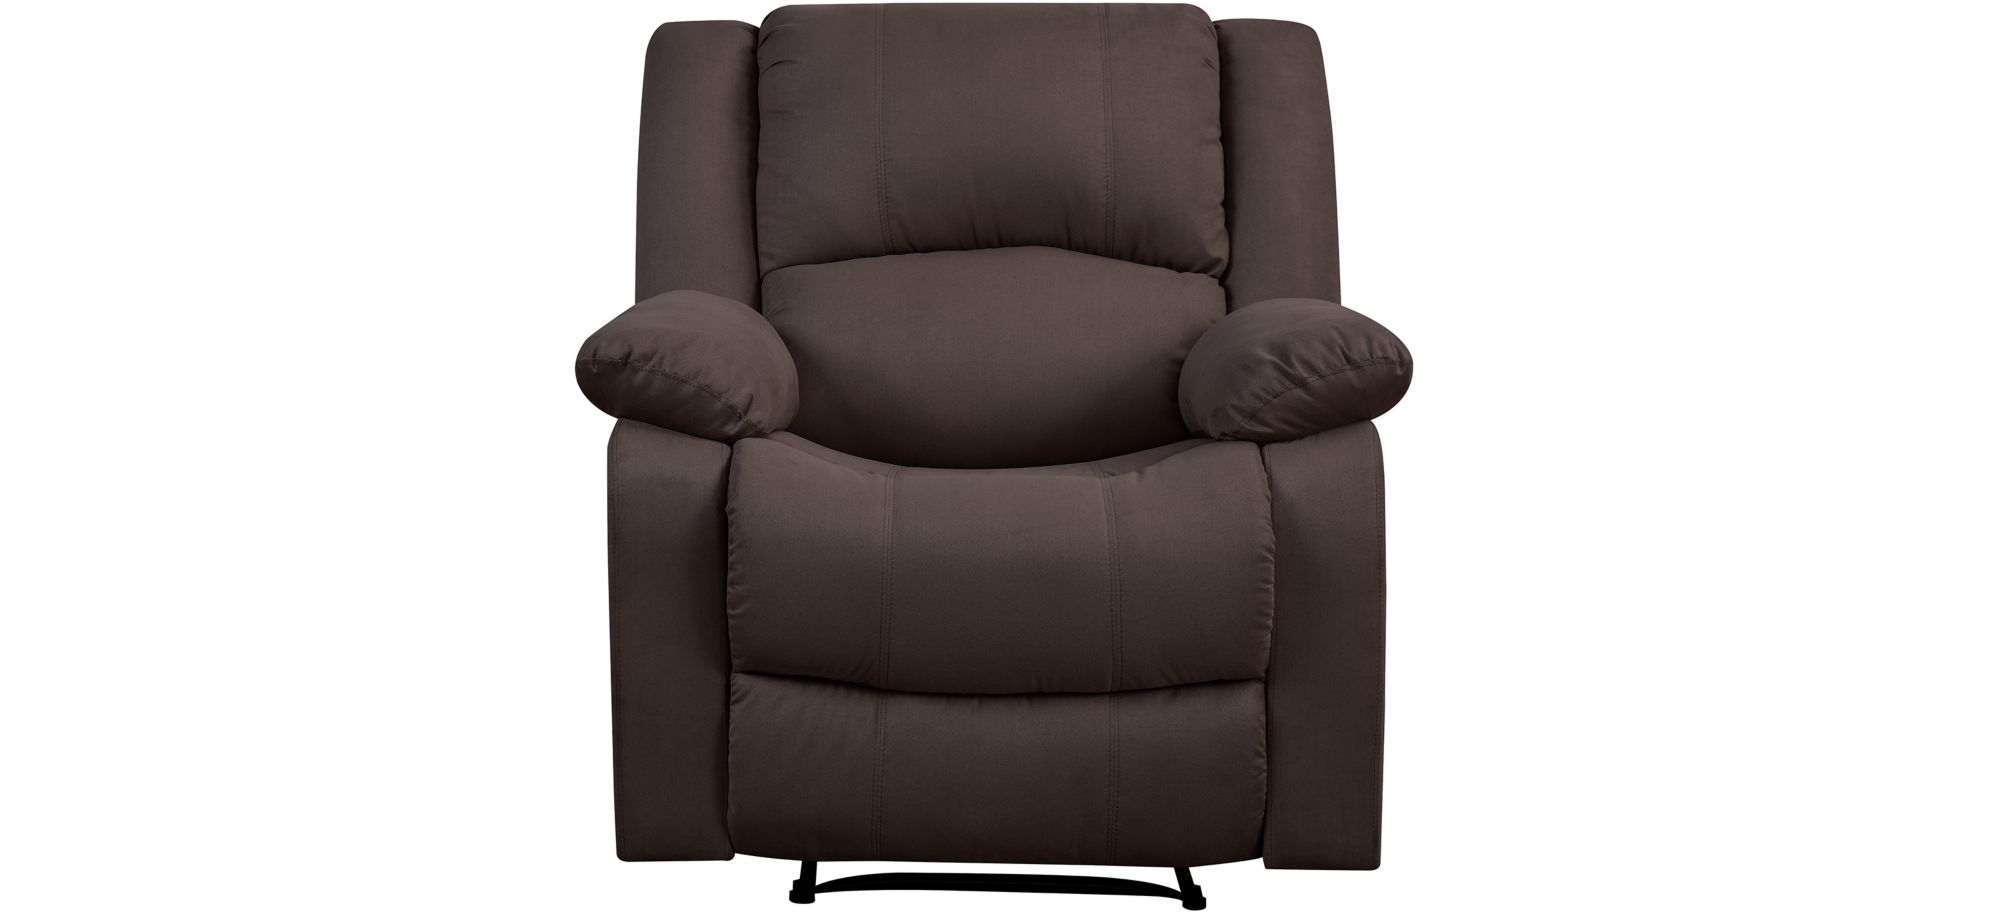 Pierce Manual Recliner in Chocolate by Lifestyle Solutions